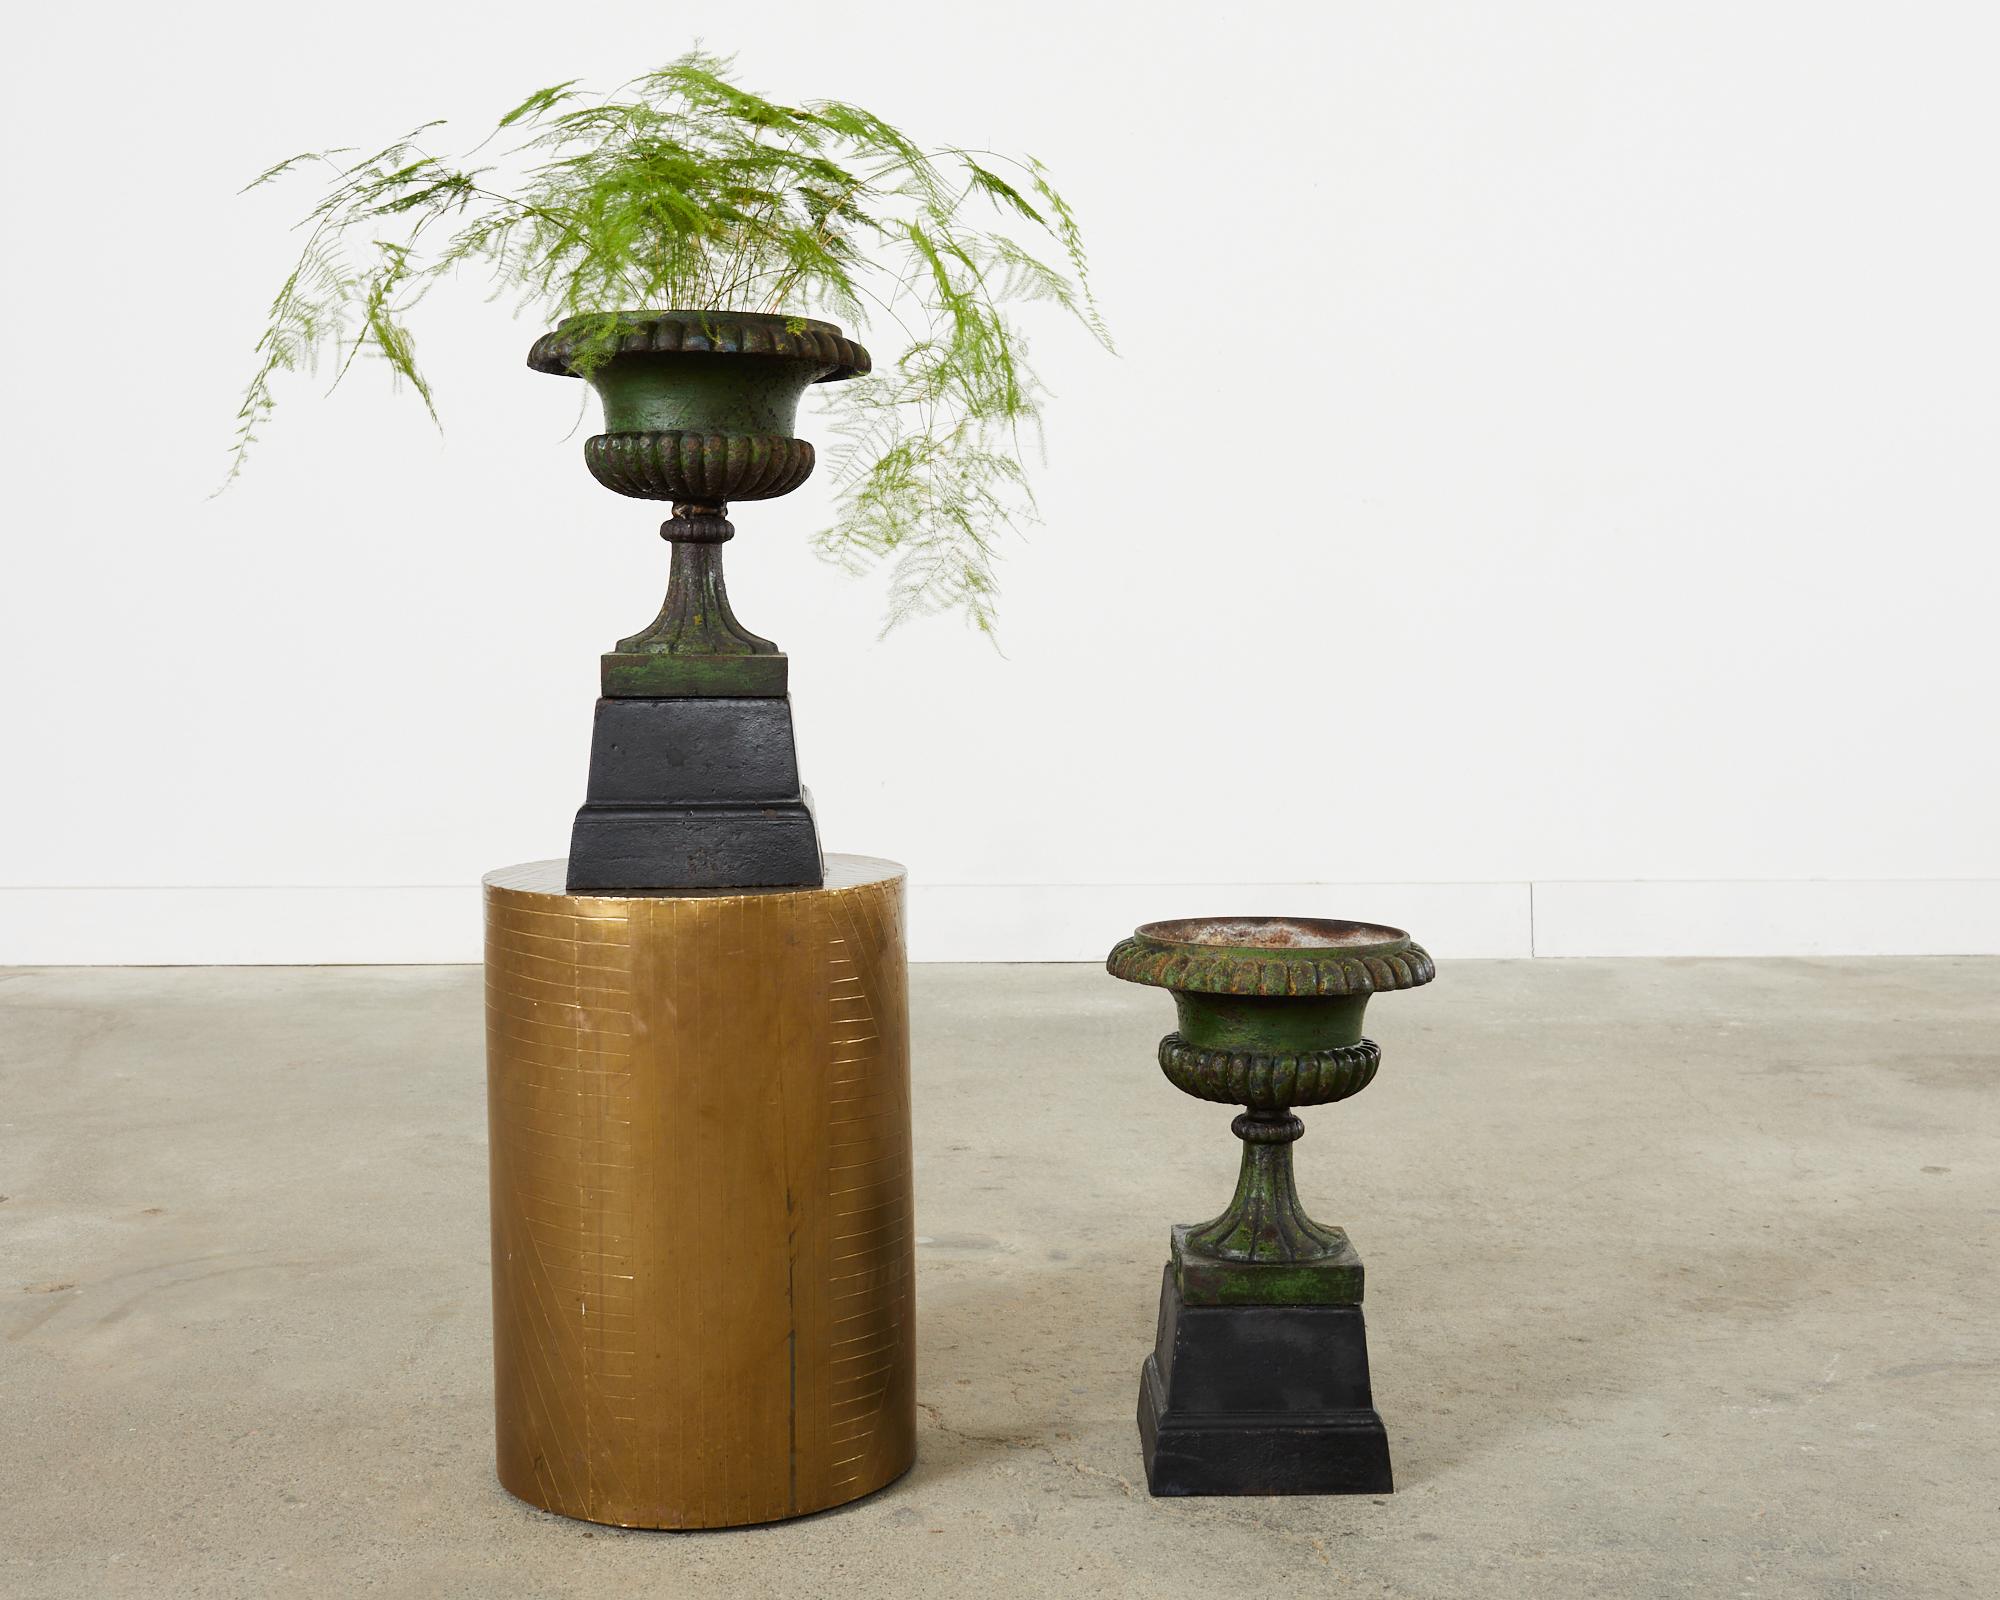 Rare pair of signed and stamped campana form urns, vases, or jardinaires made by the 17th century foundry Husqvarna in Sweden. Each urn has neoclassical style with fluted or reeded design. The vases are mounted on footed plinths or stands. The iron